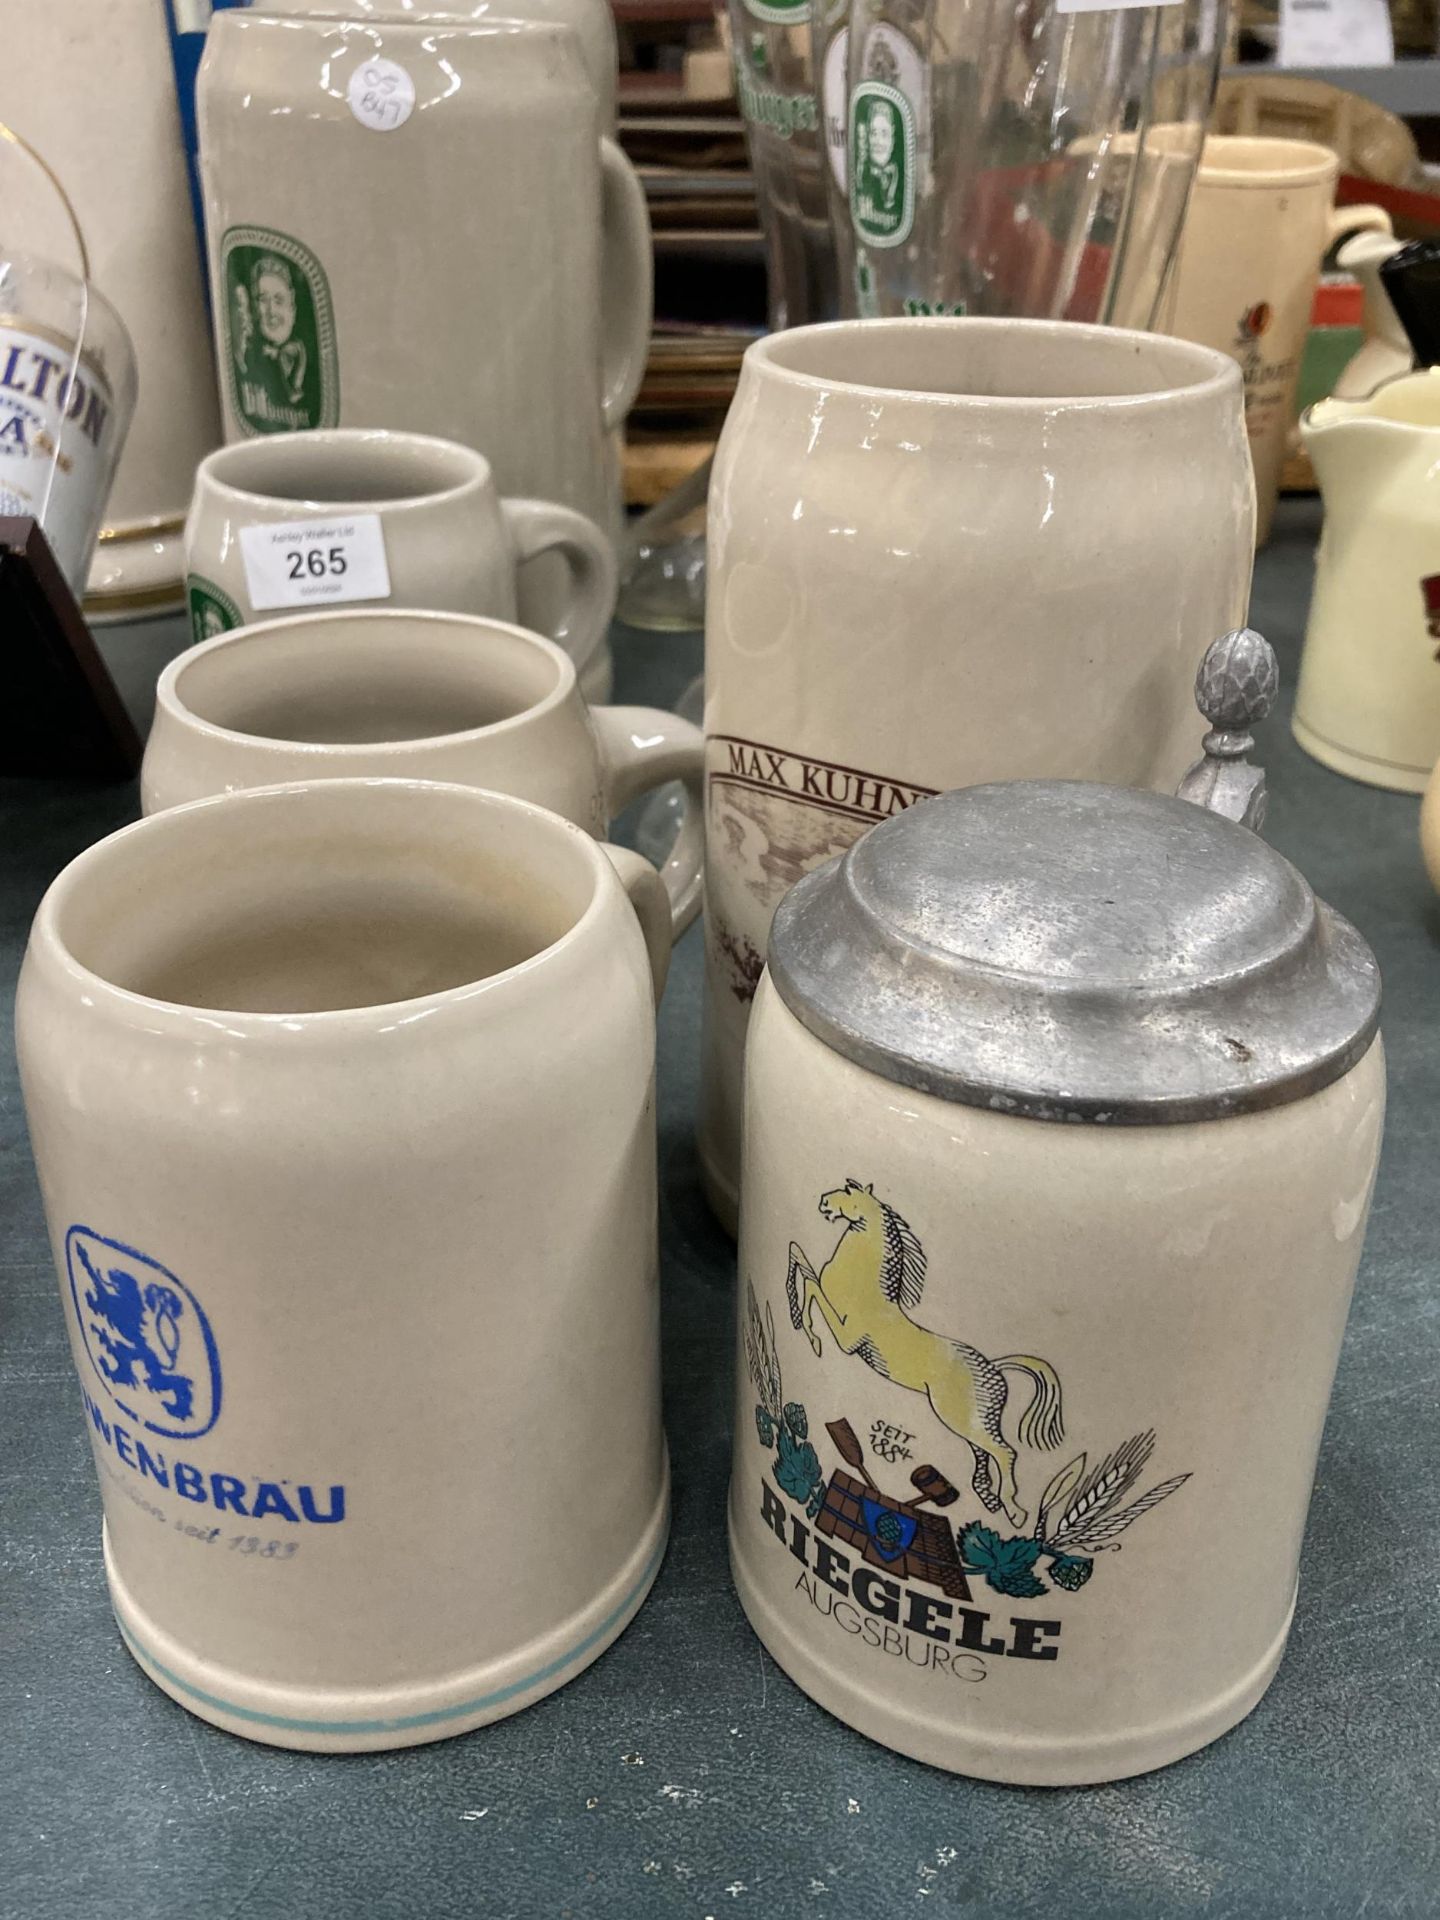 FOUR STONEWARE STEINS TO INCLUDE KUNHLE, DAB, RIEGELE AND LOWENBRAU